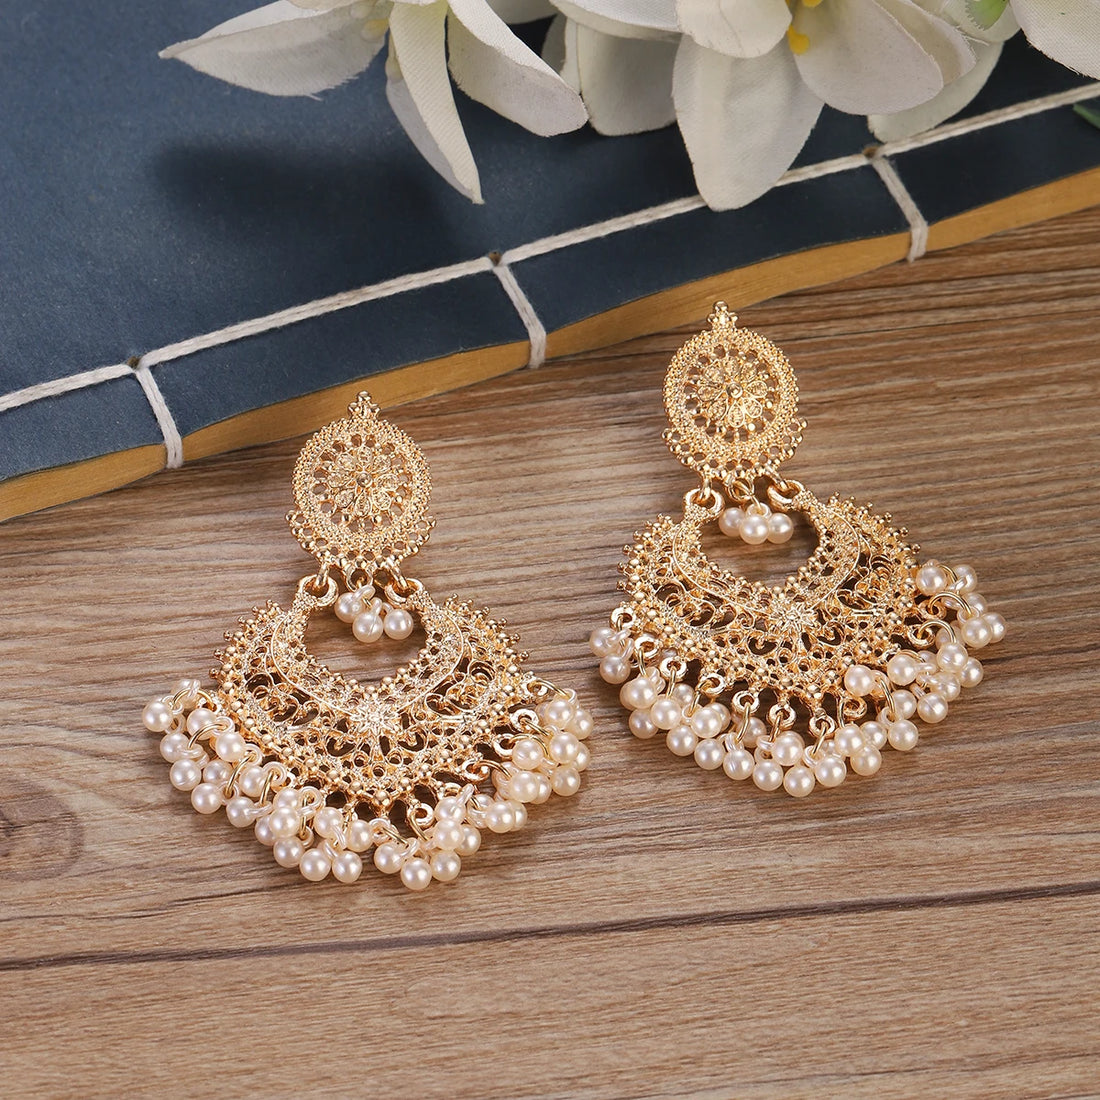 Ethnic Indian Earring Round